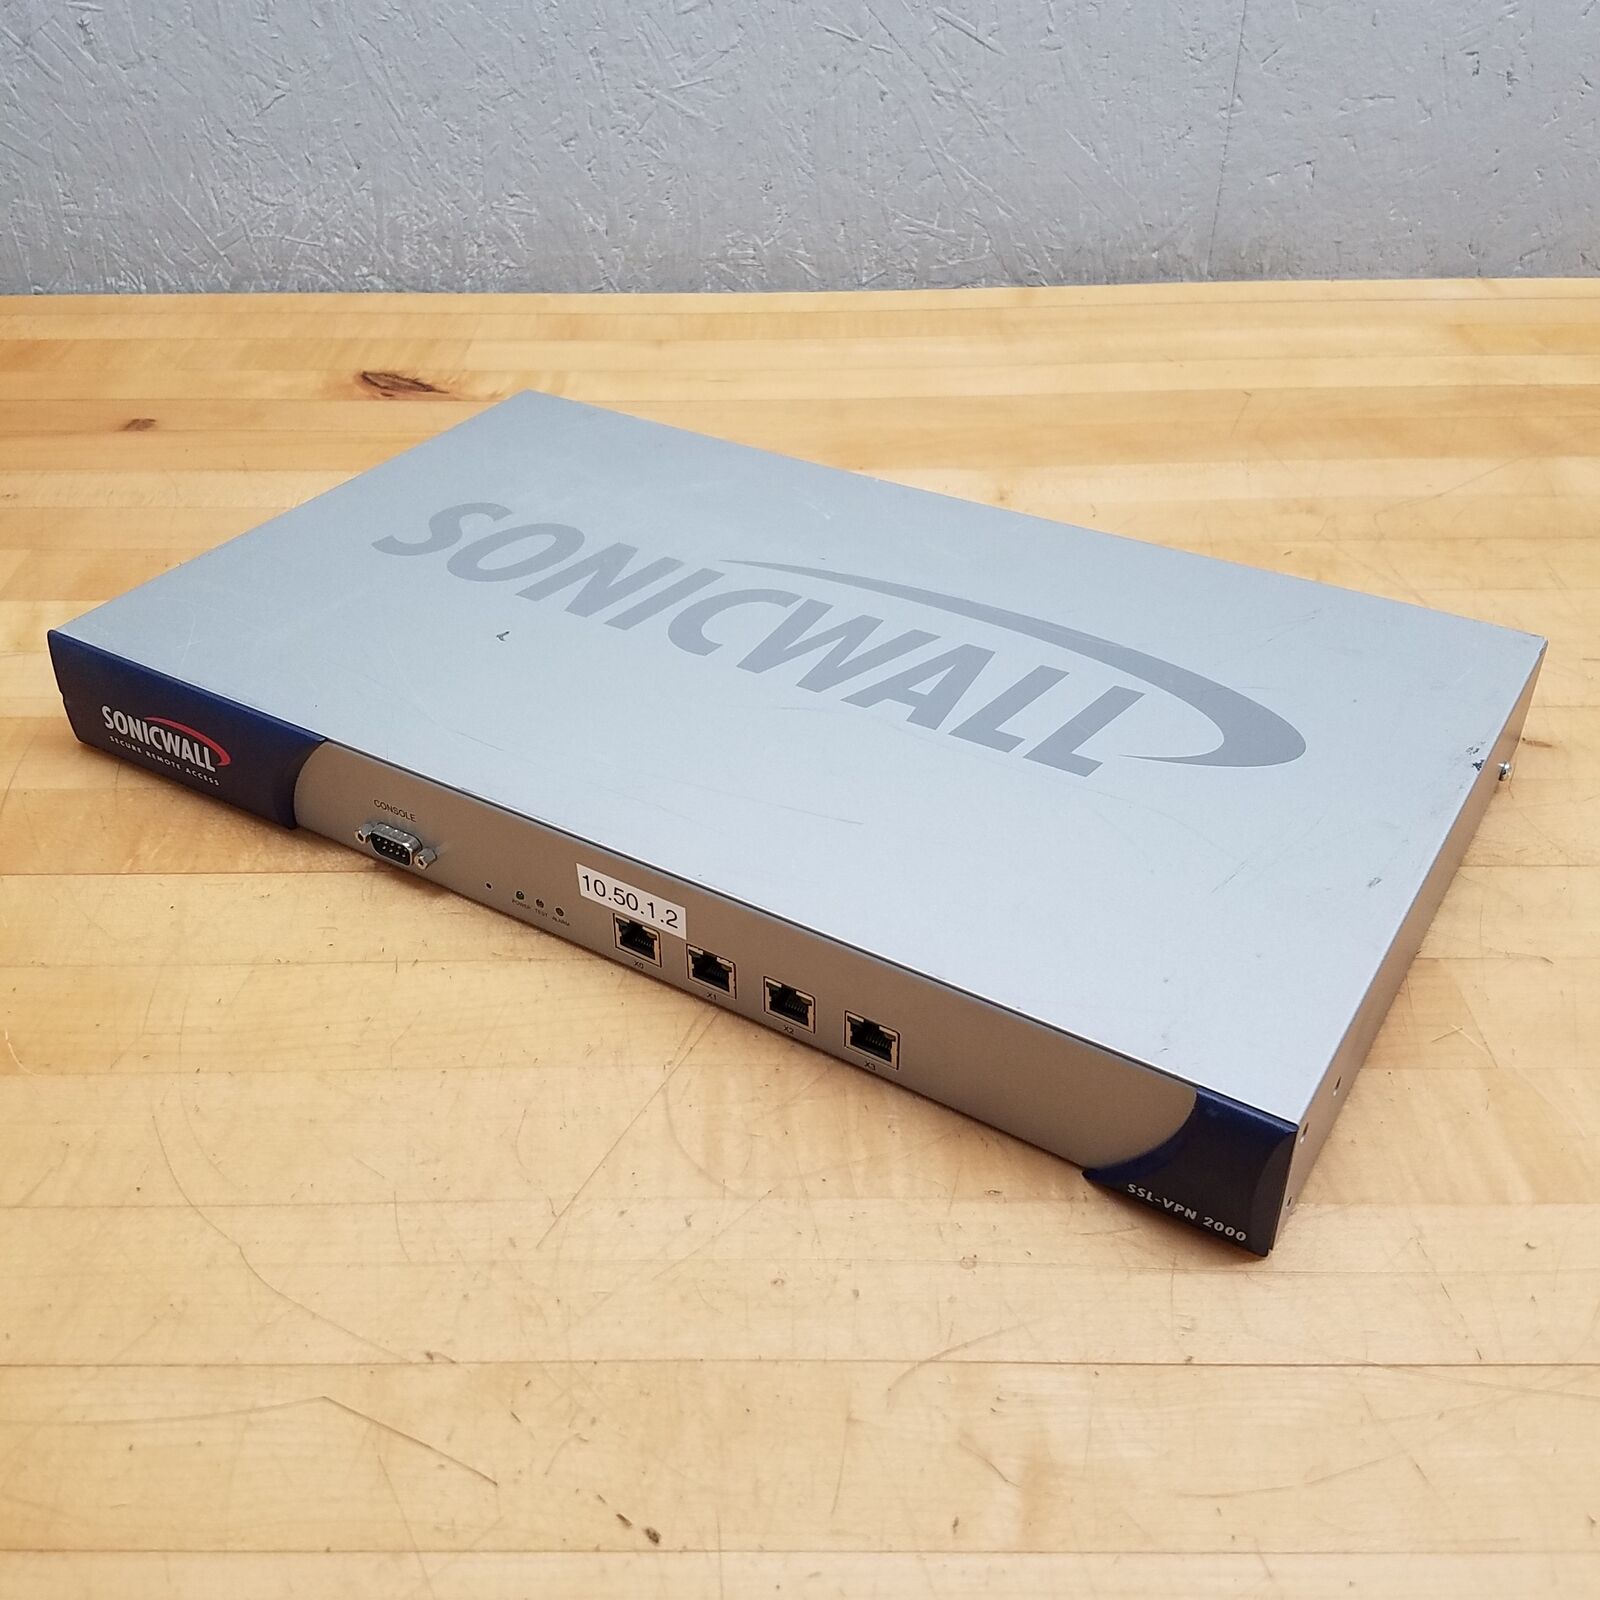 Sonicwall SSL-VPN 2000 Security Appliance - USED